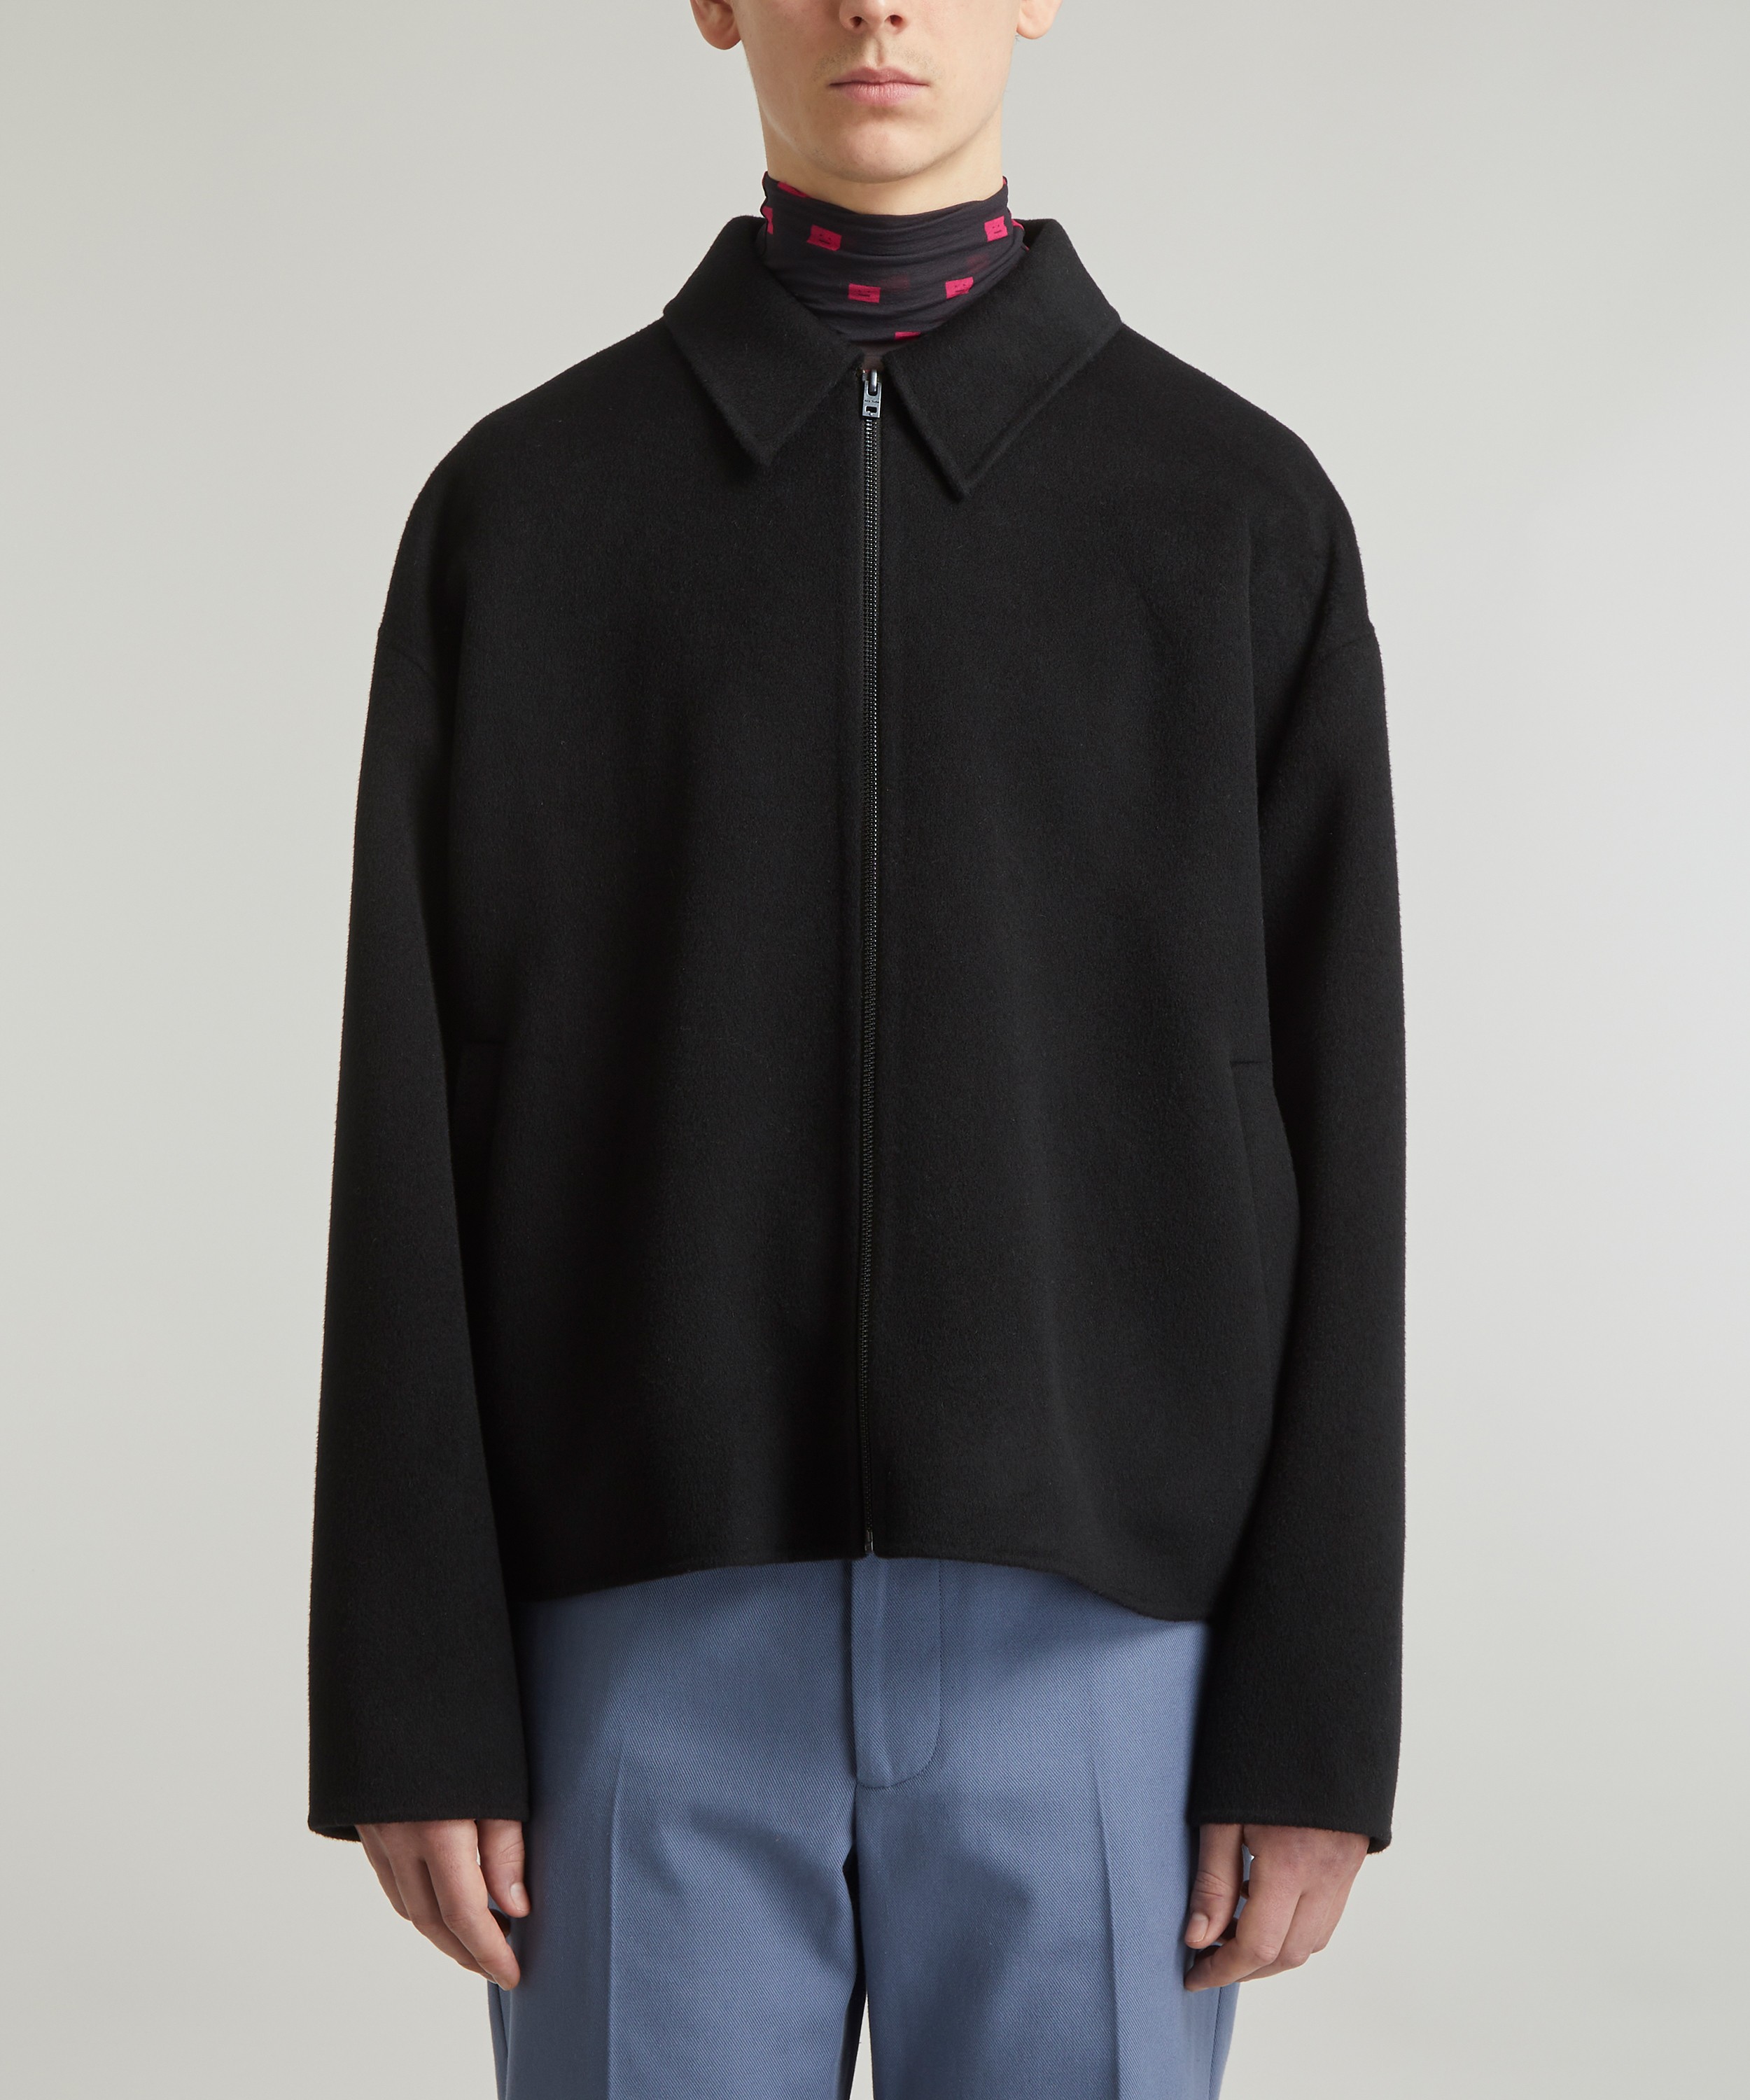 Acne Studios Double-Faced Wool Jacket | Liberty